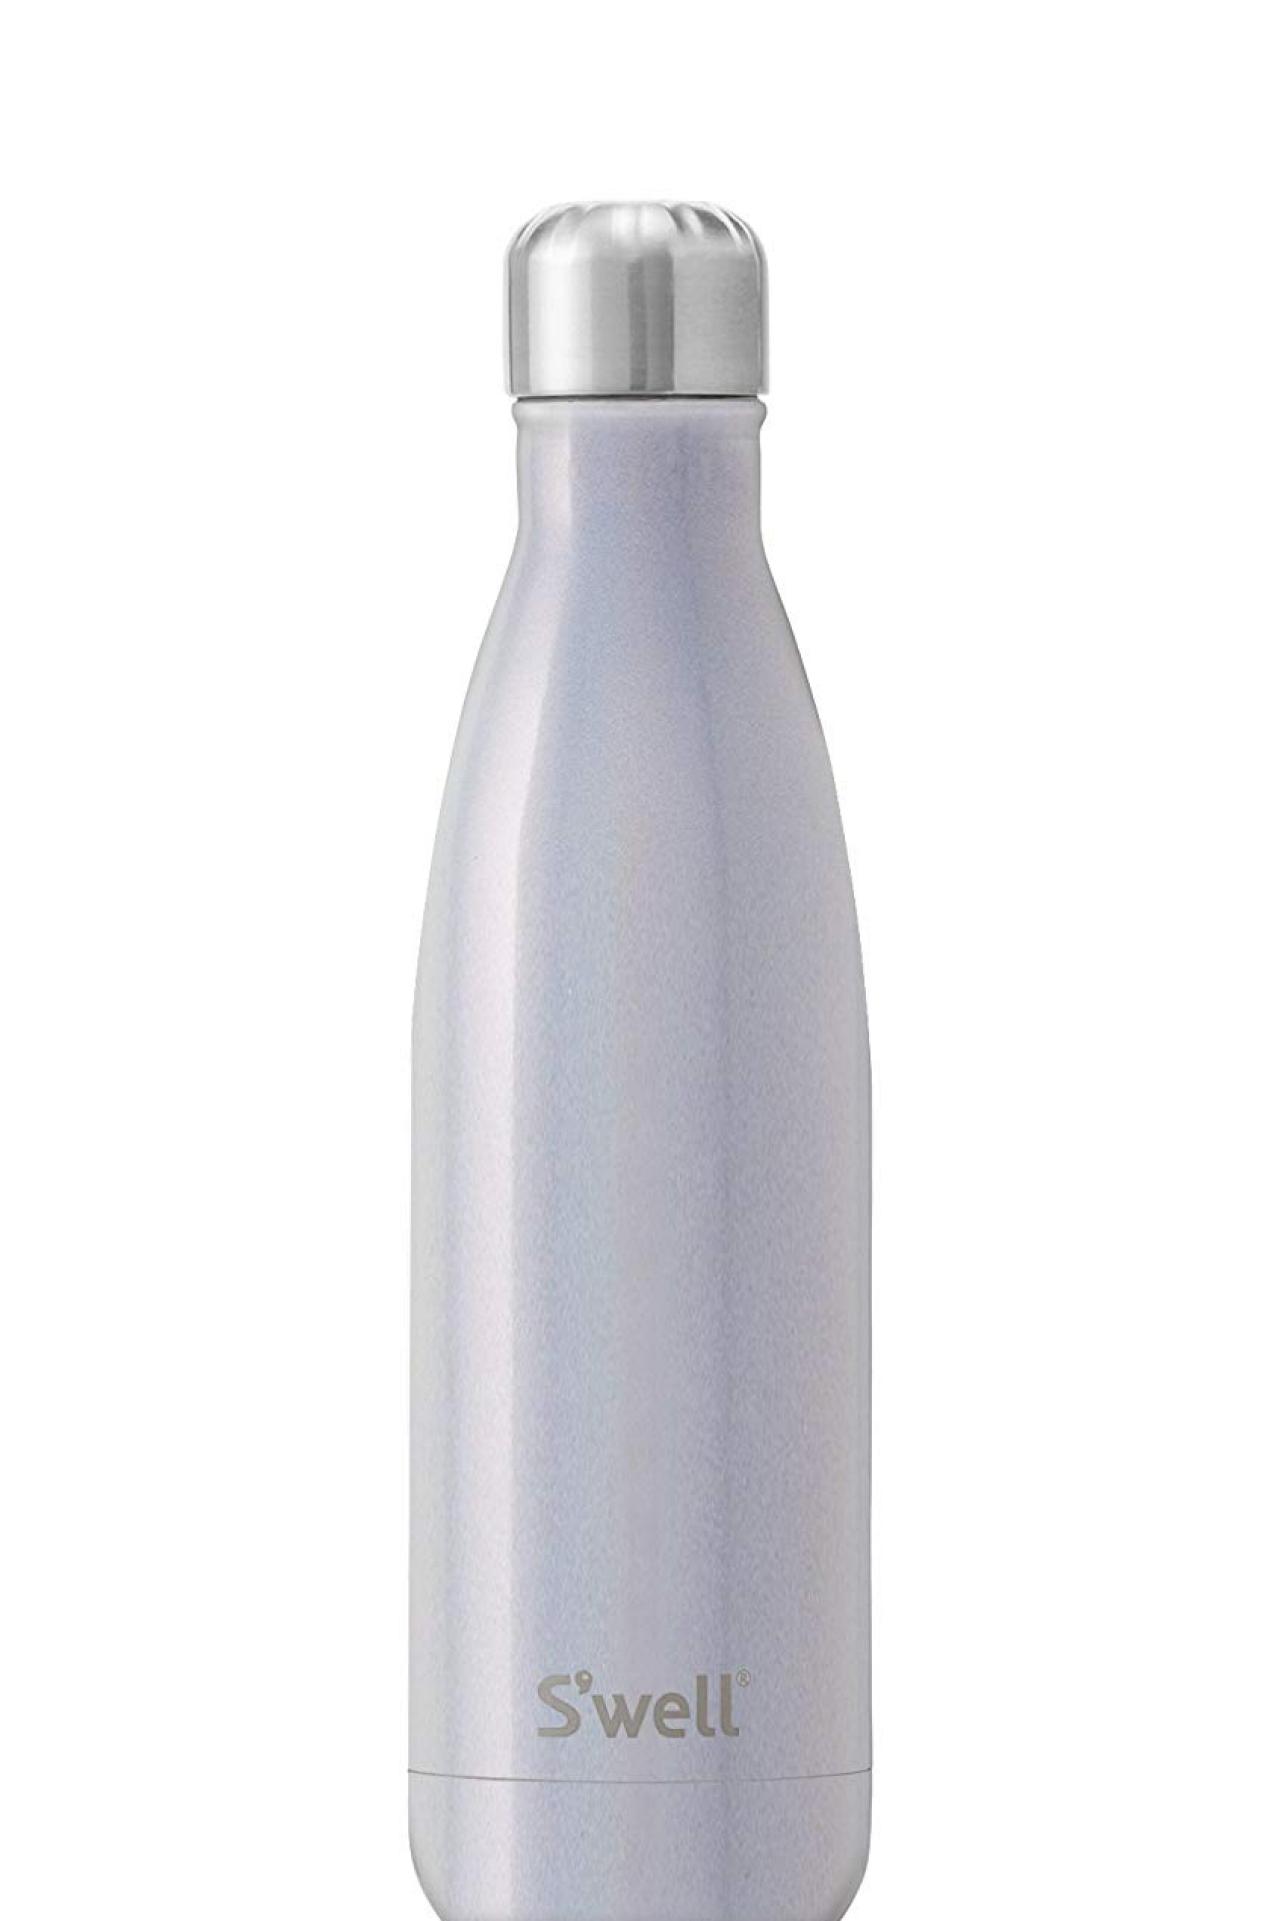 https://hgtvhome.sndimg.com/content/dam/images/hgtv/products/2018/11/21/rx_amazon_swell-stainless-steel-water-bottle.jpeg.rend.hgtvcom.1280.1920.suffix/1542827828603.jpeg